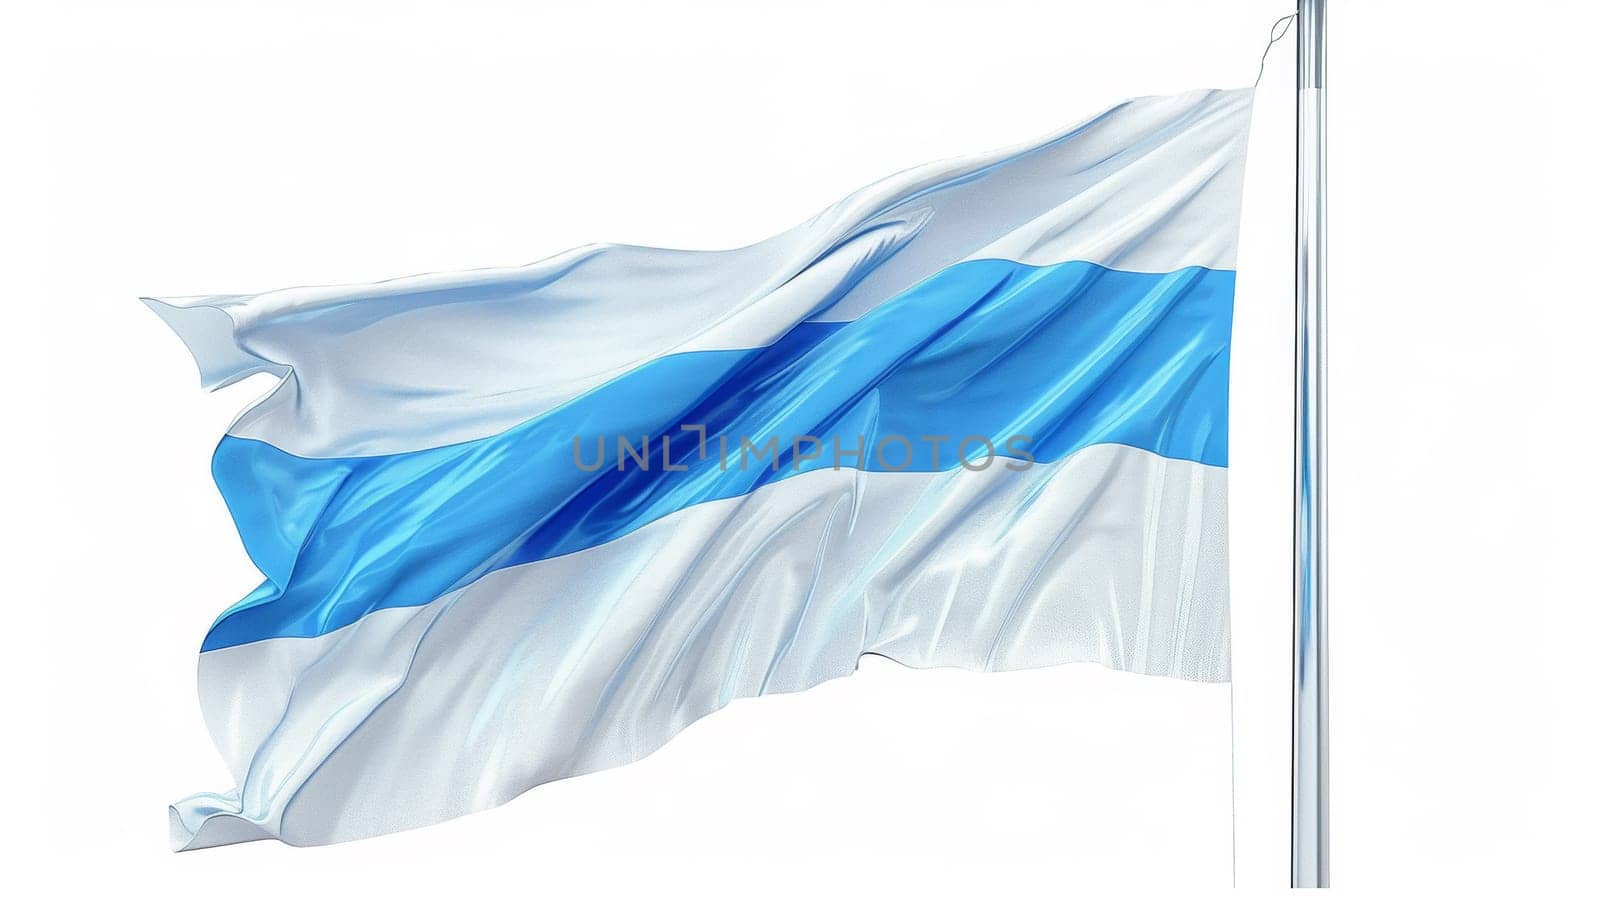 A flag with a blue and white stripe is waving in the wind